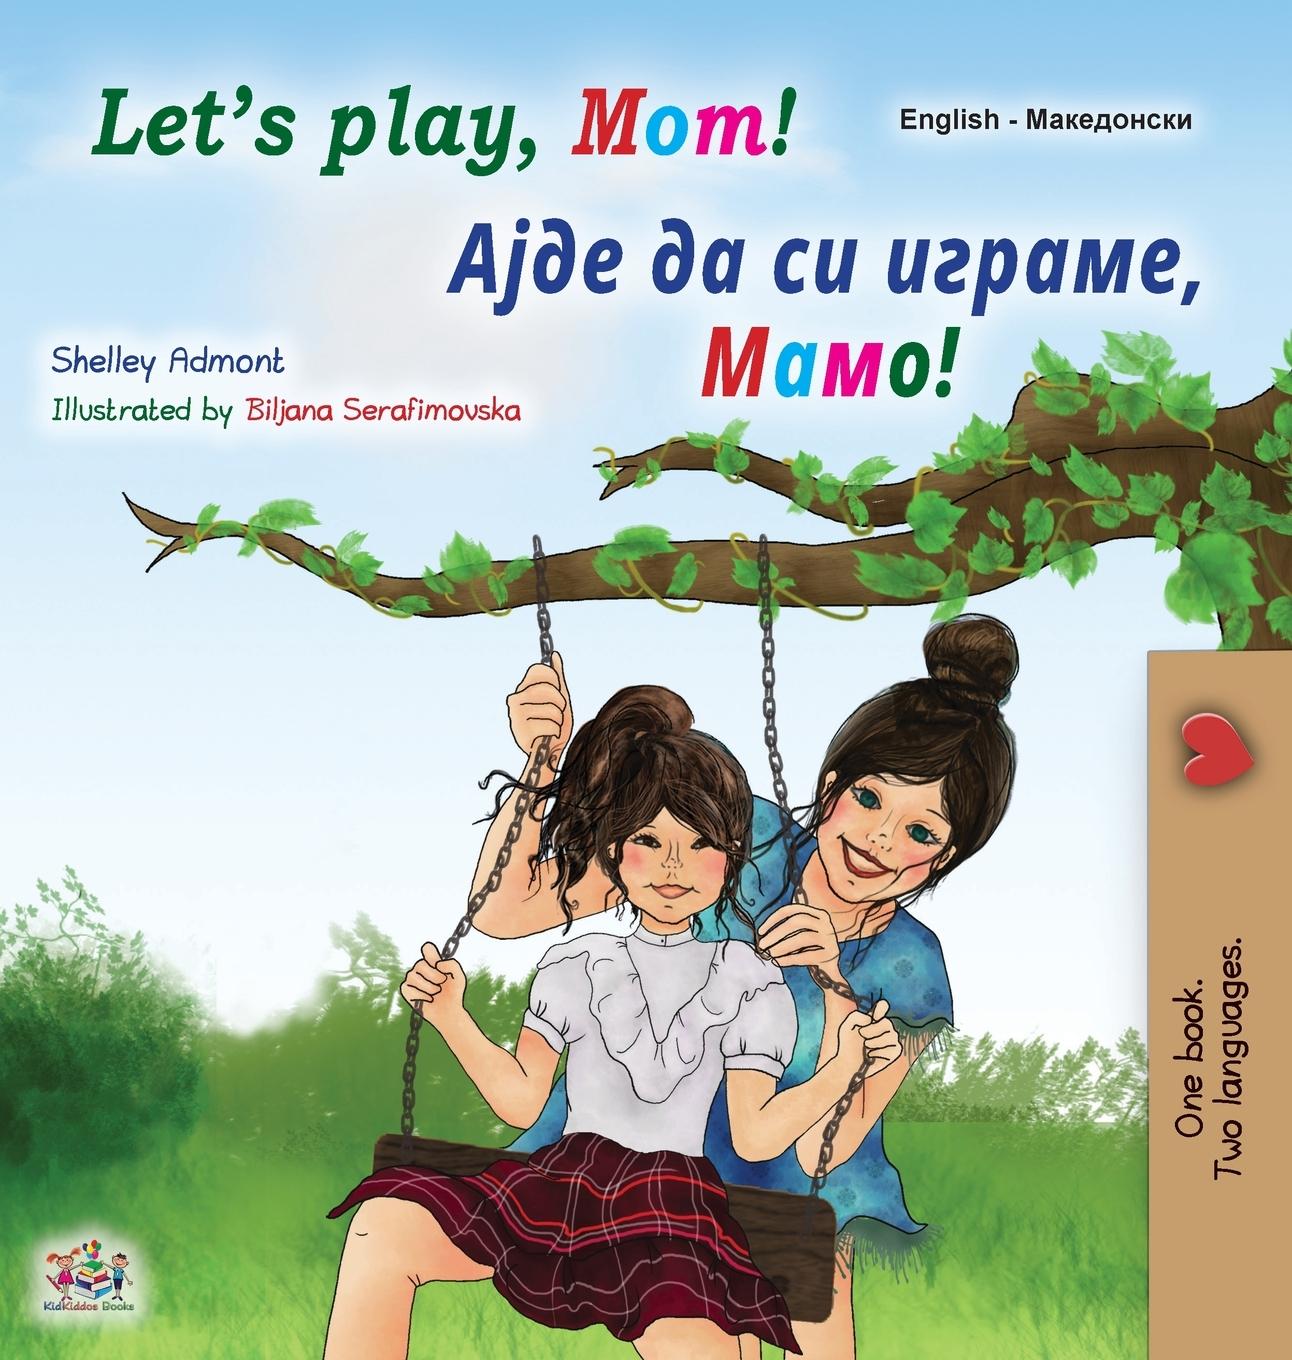 Book Let's play, Mom! (English Macedonian Bilingual Book for Kids) Kidkiddos Books